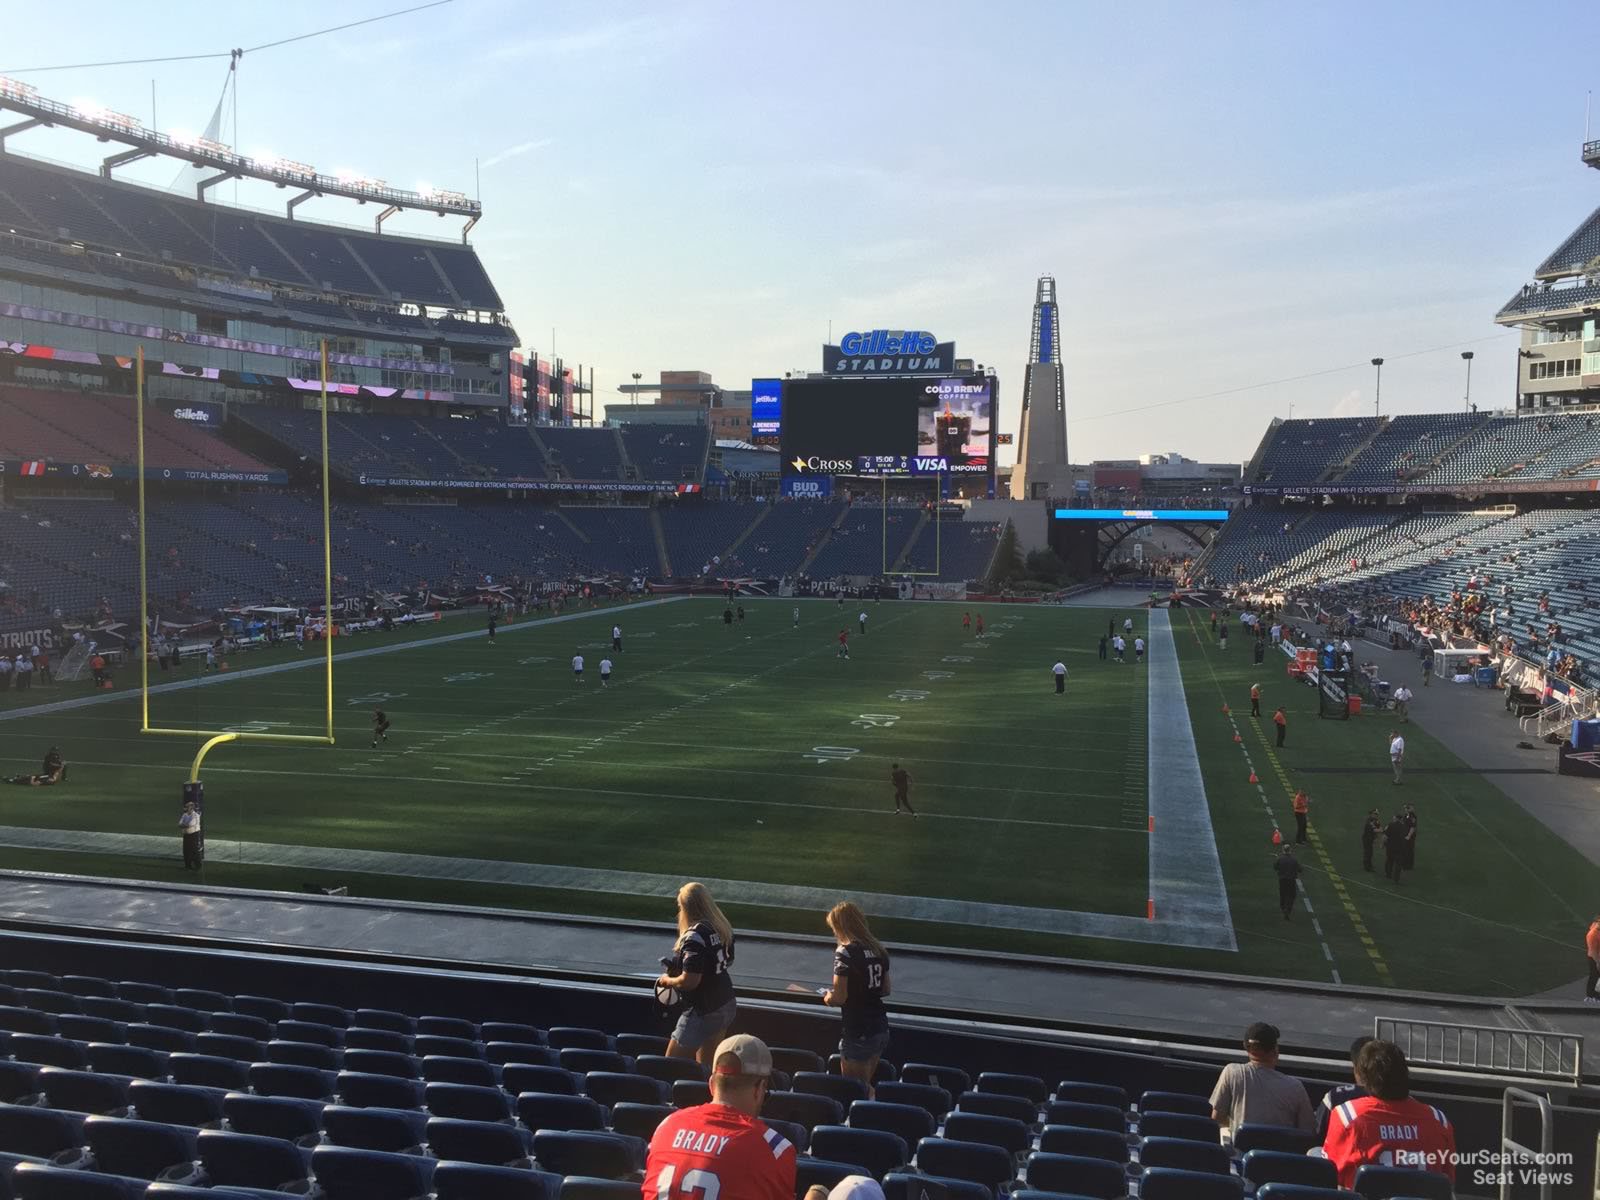 section 119, row 29 seat view  for football - gillette stadium